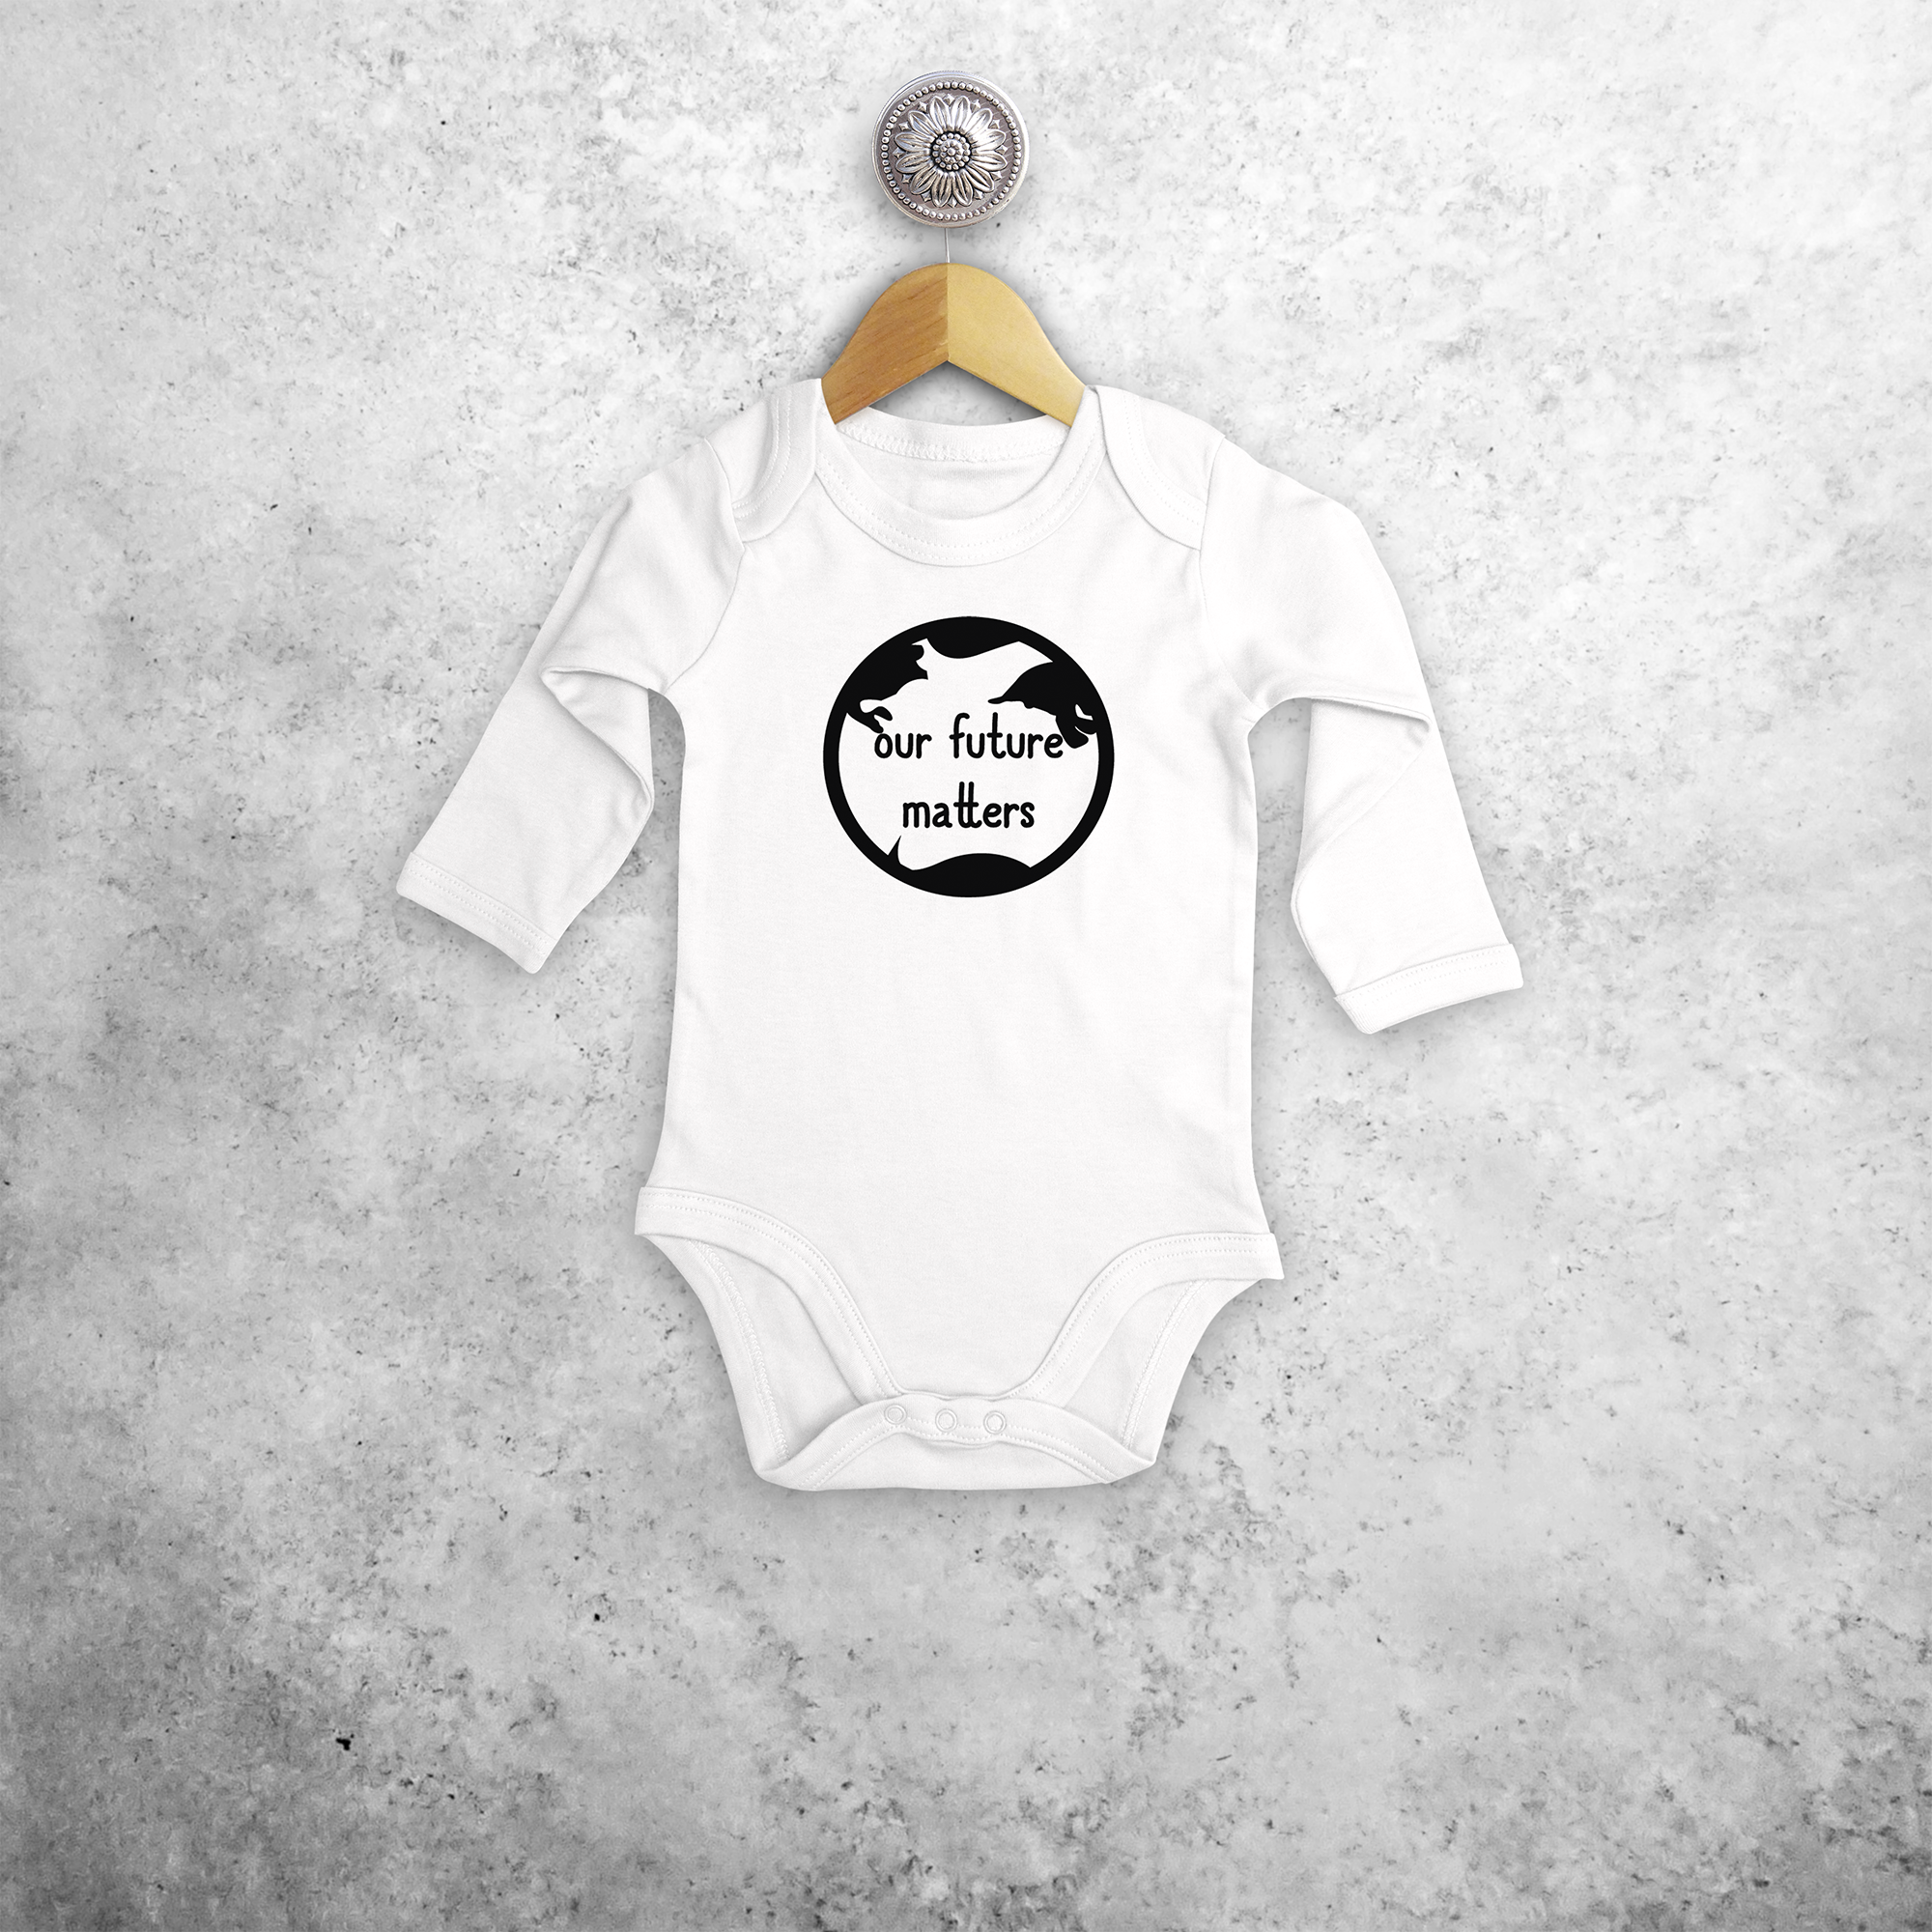 'Our future matters' baby longsleeve bodysuit